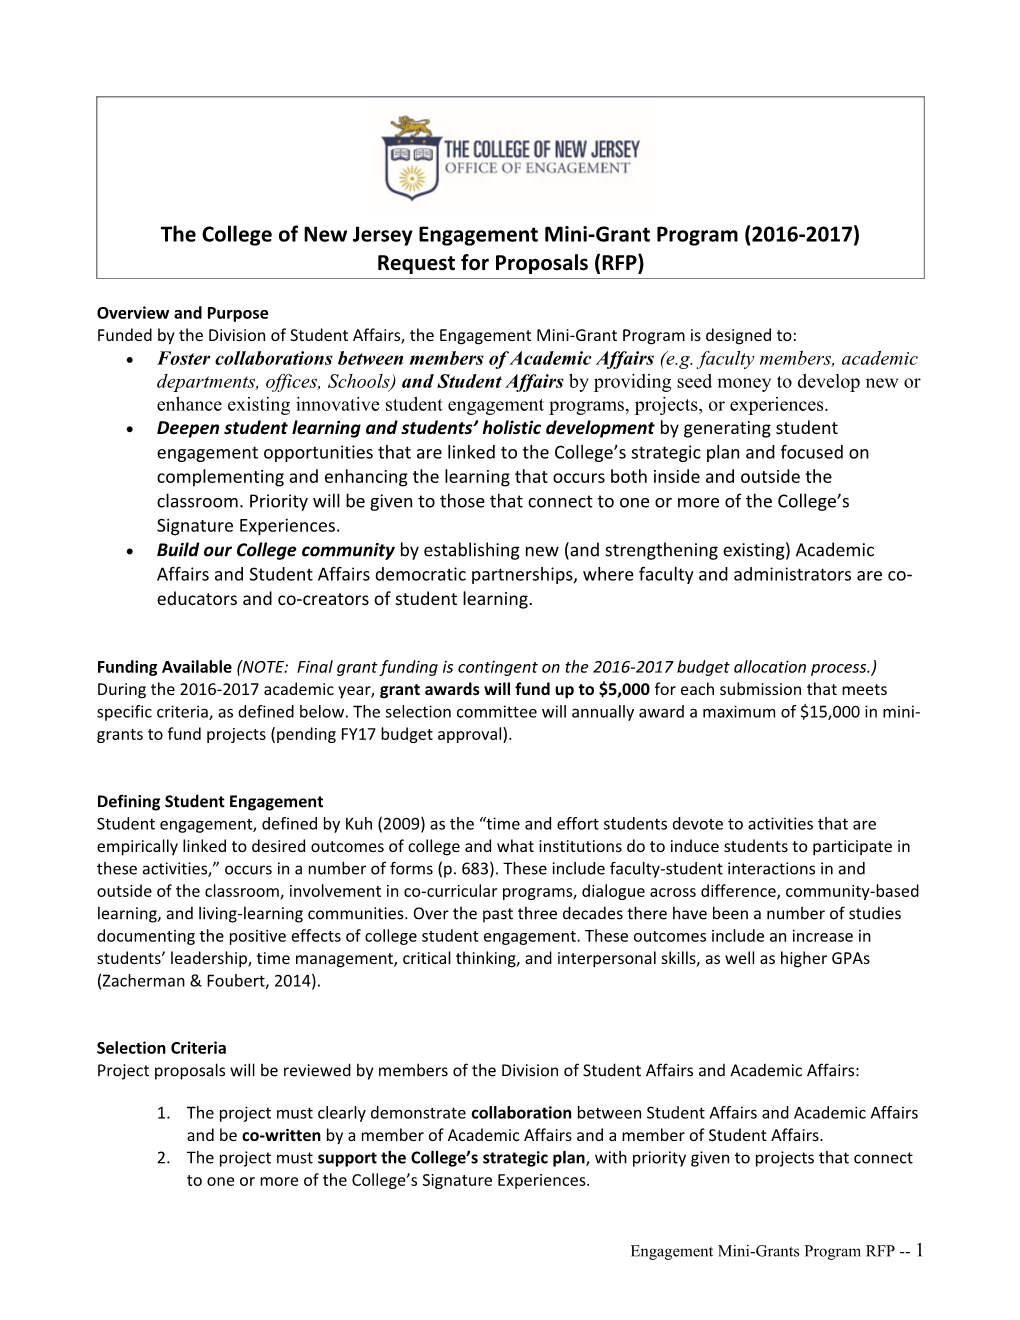 The College of New Jersey Engagement Mini-Grant Program (2016-2017)